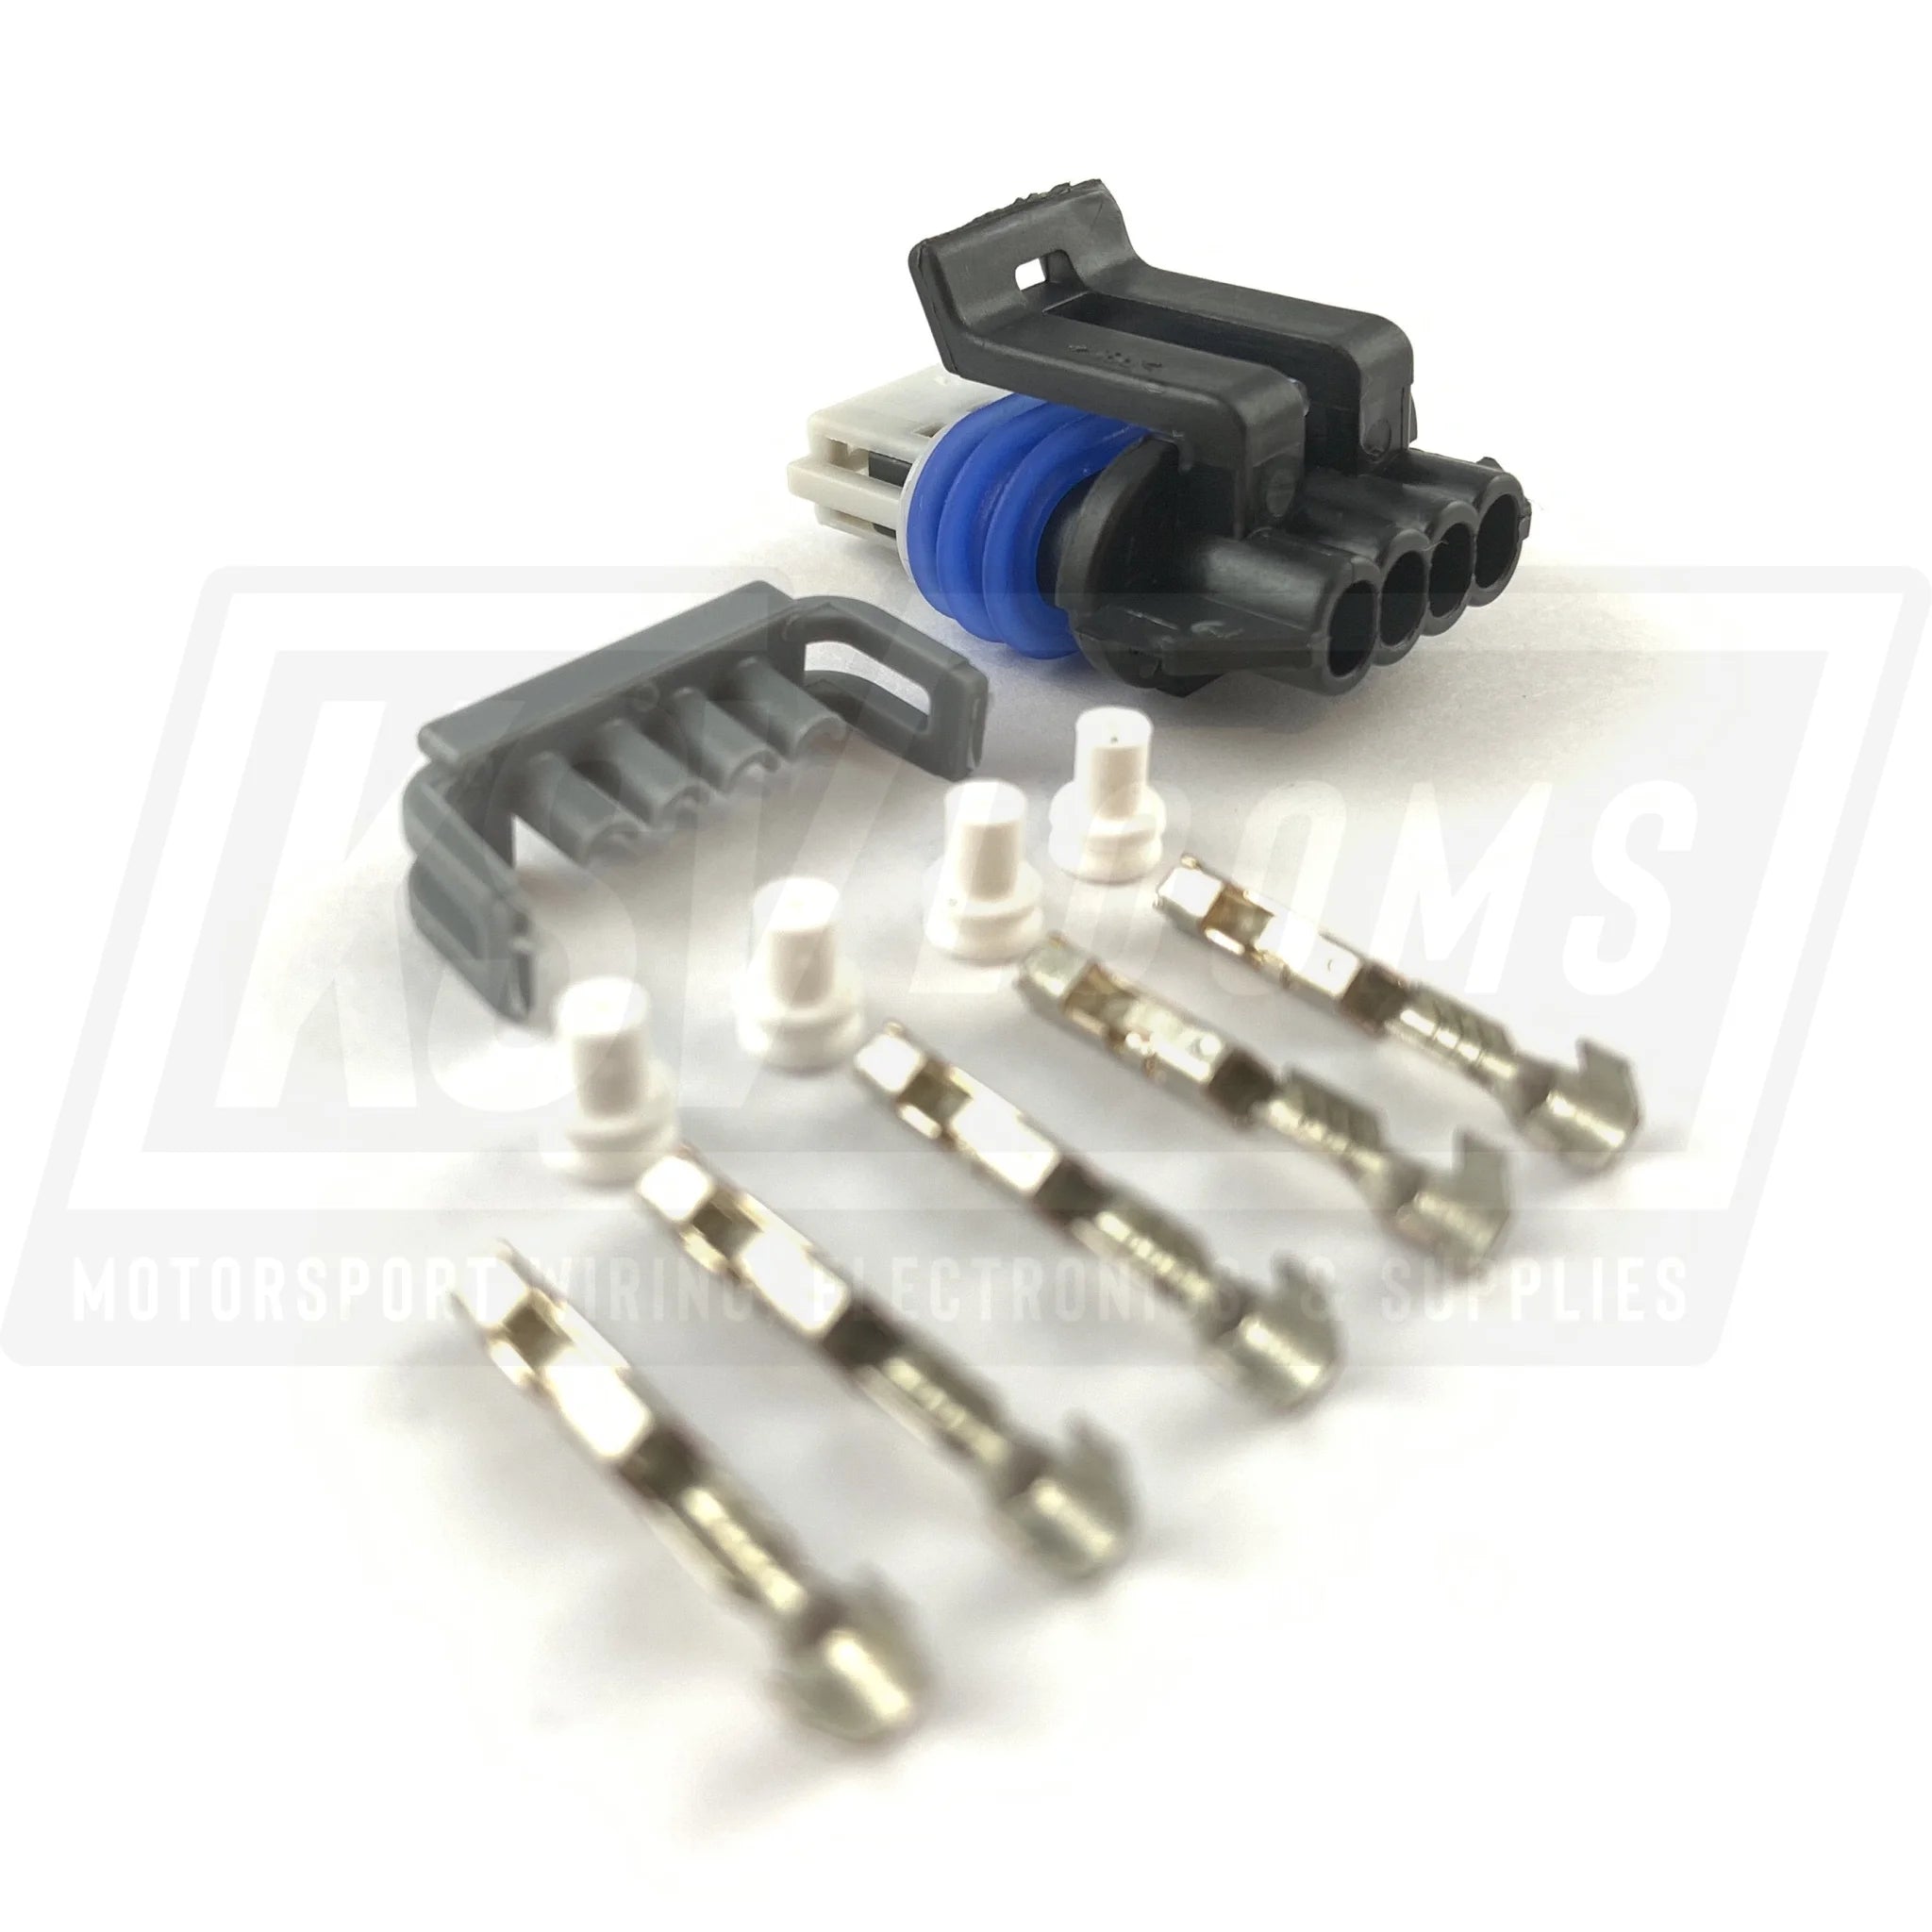 4-Way Connector Kit For Gm Ls2 Ls7 Ignition Coil (22-20 Awg)